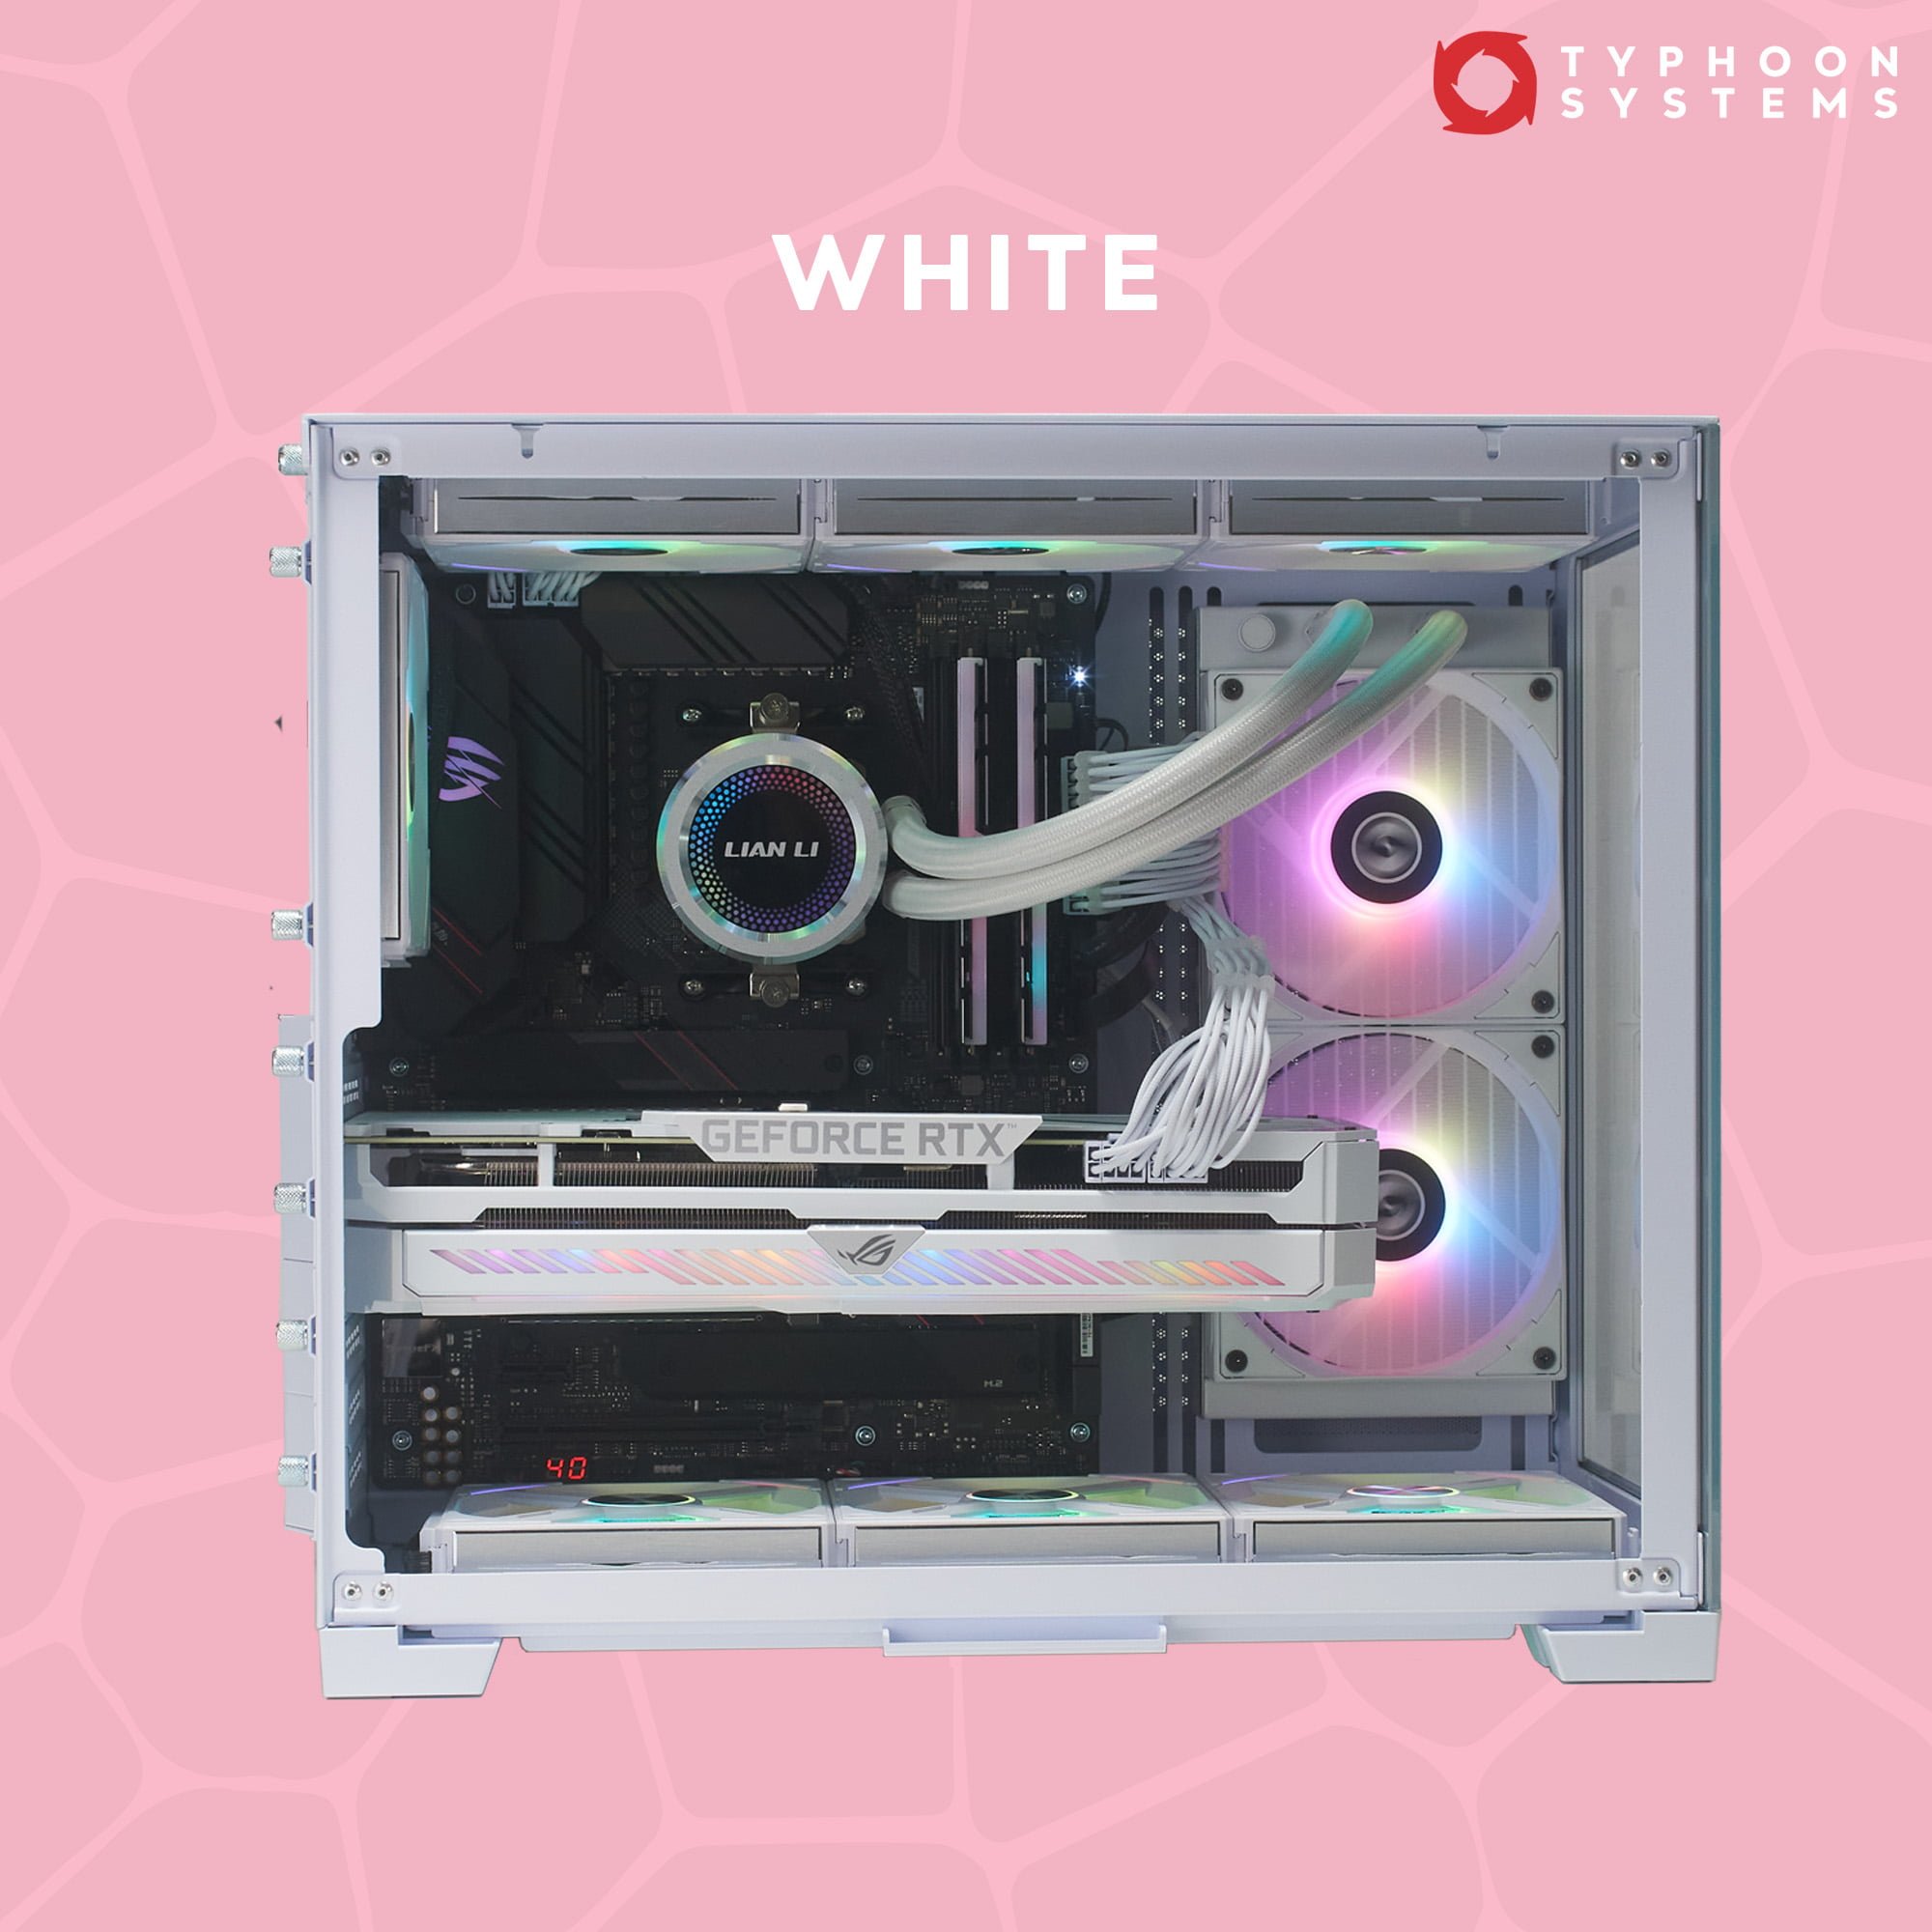 Typhoon Systems WHITE, the new Pink